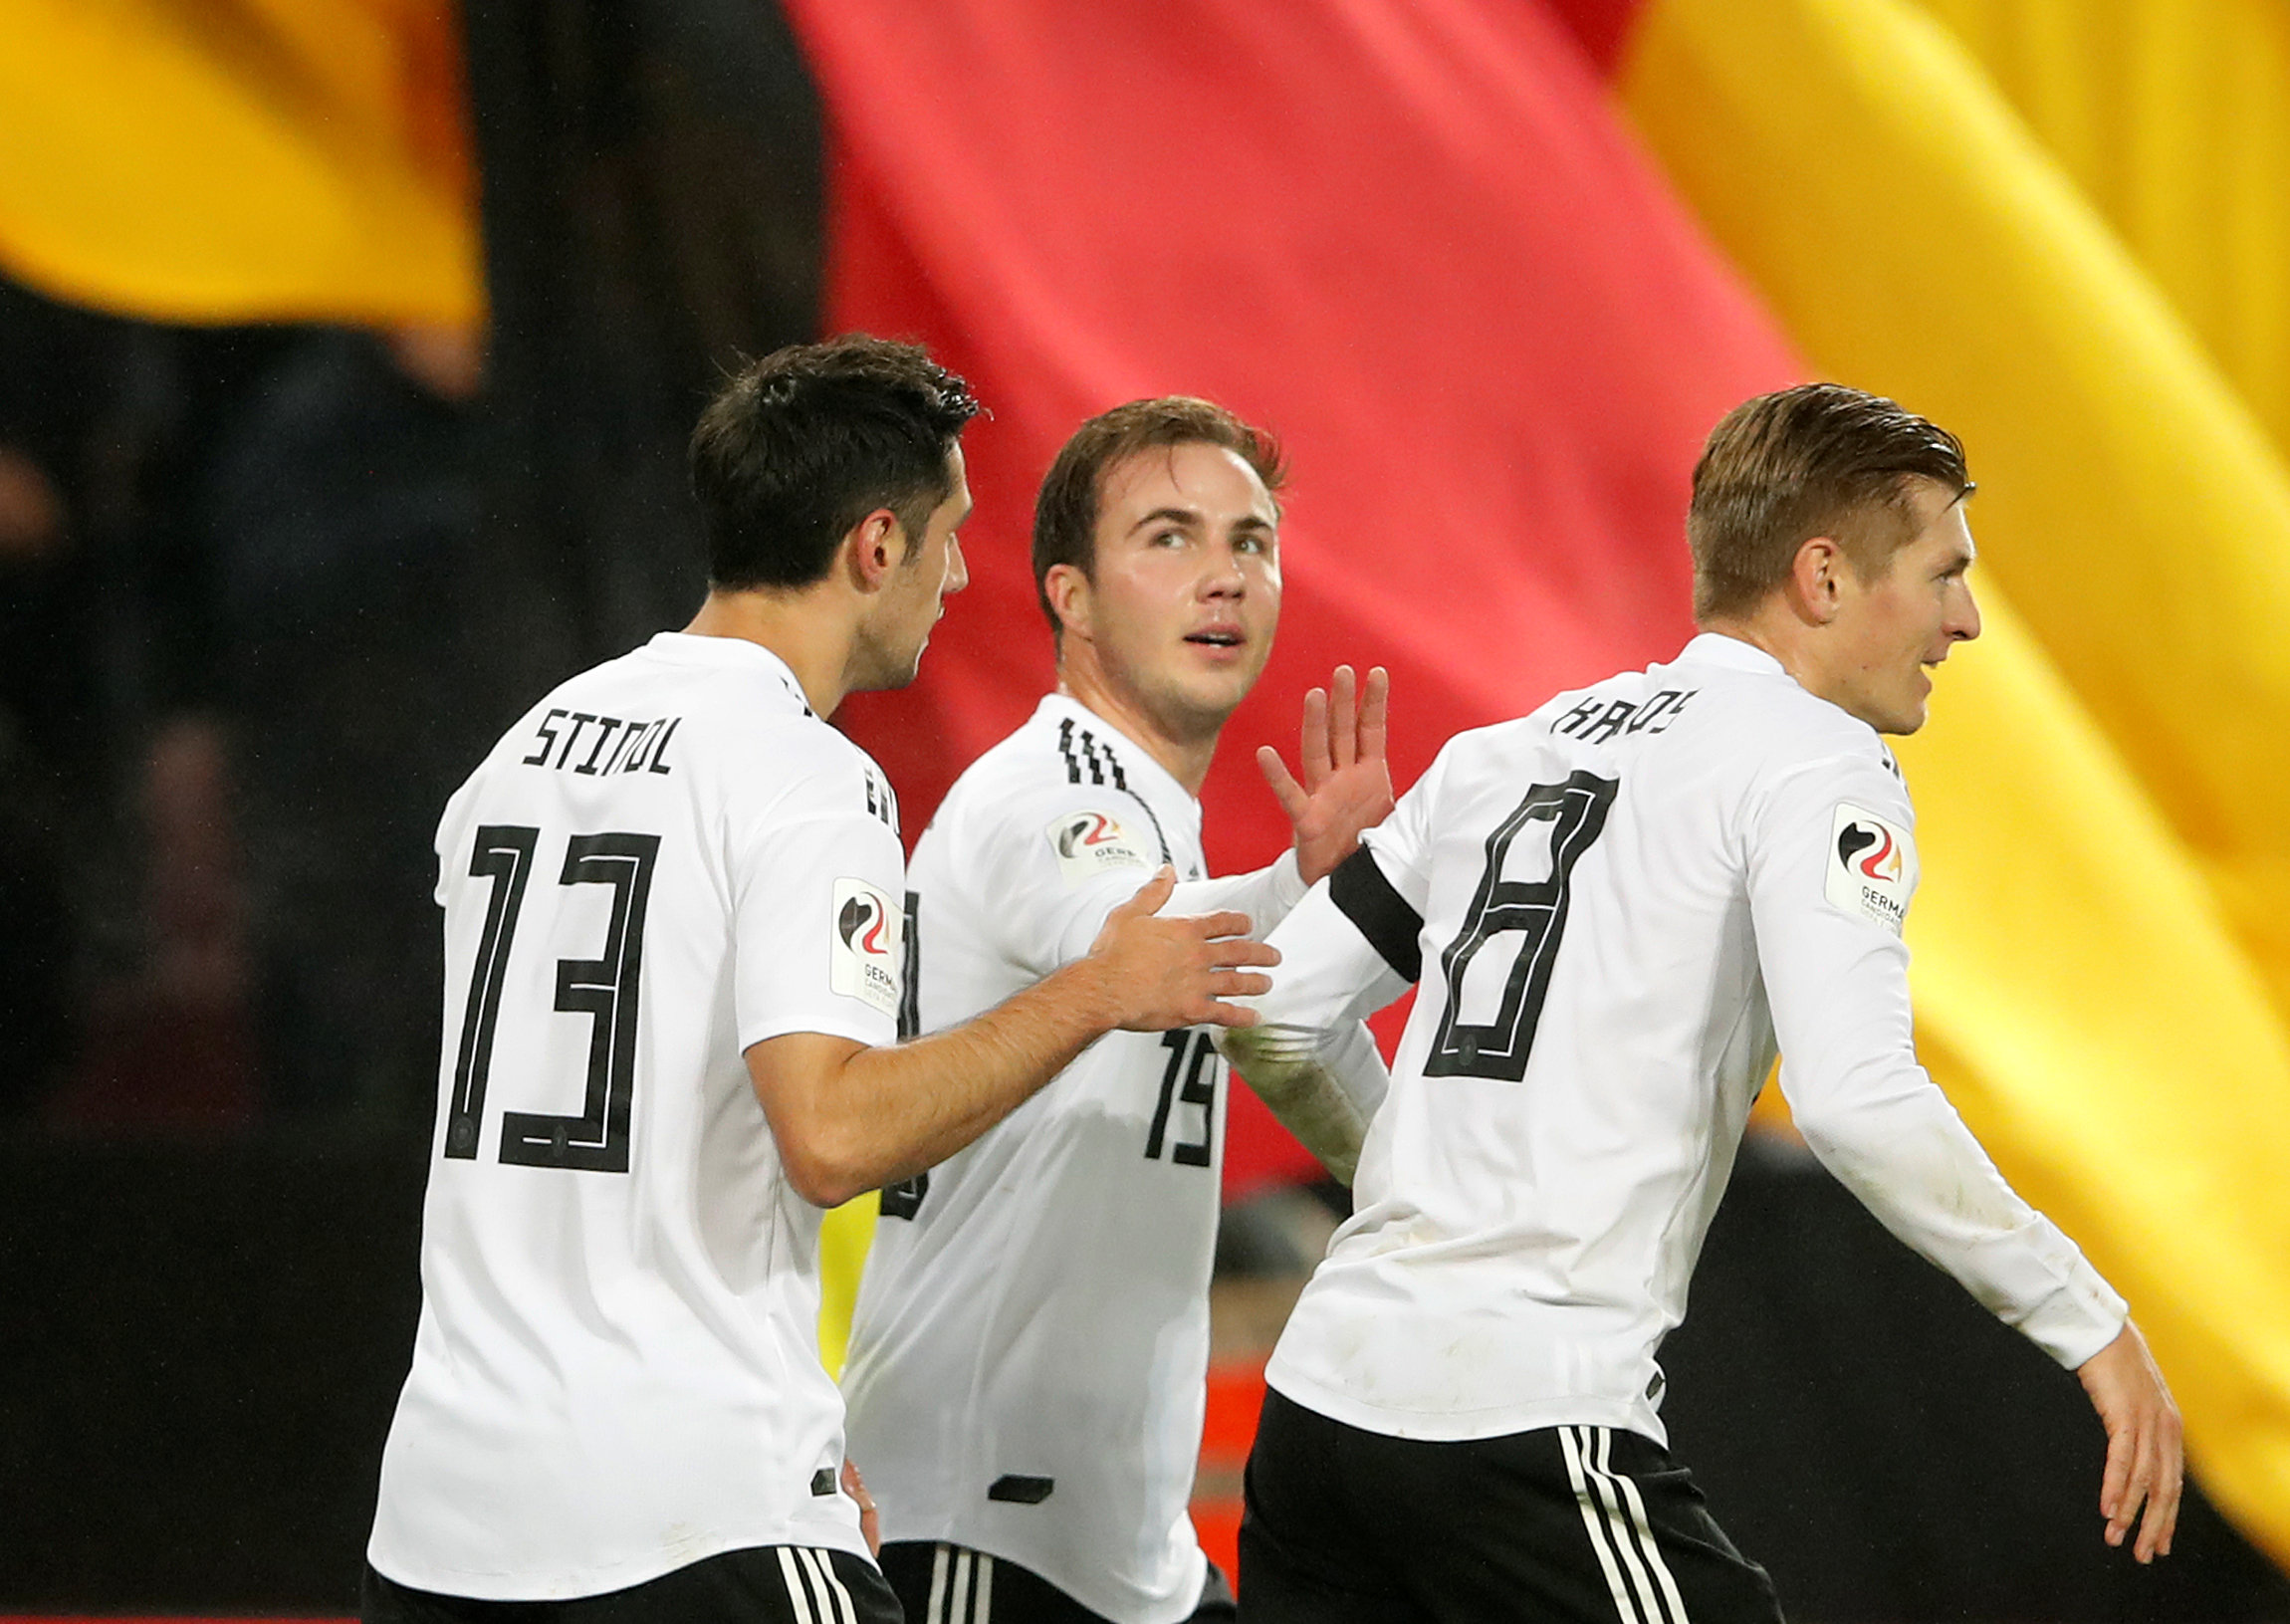 Football: Germany's Stindl rescues late draw against France